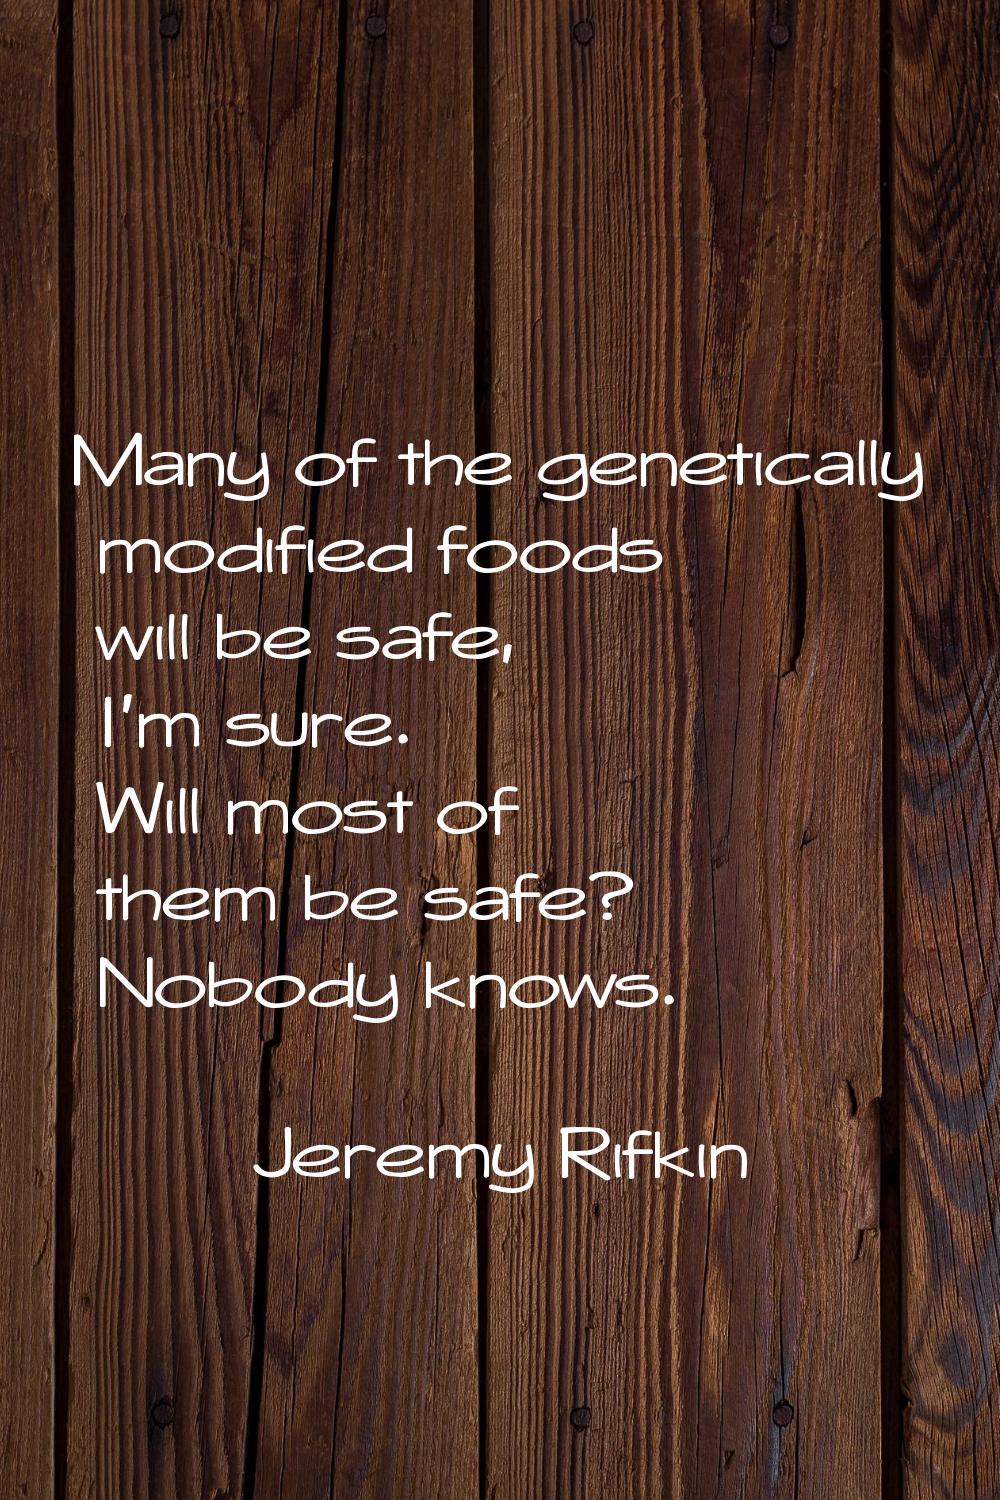 Many of the genetically modified foods will be safe, I'm sure. Will most of them be safe? Nobody kn